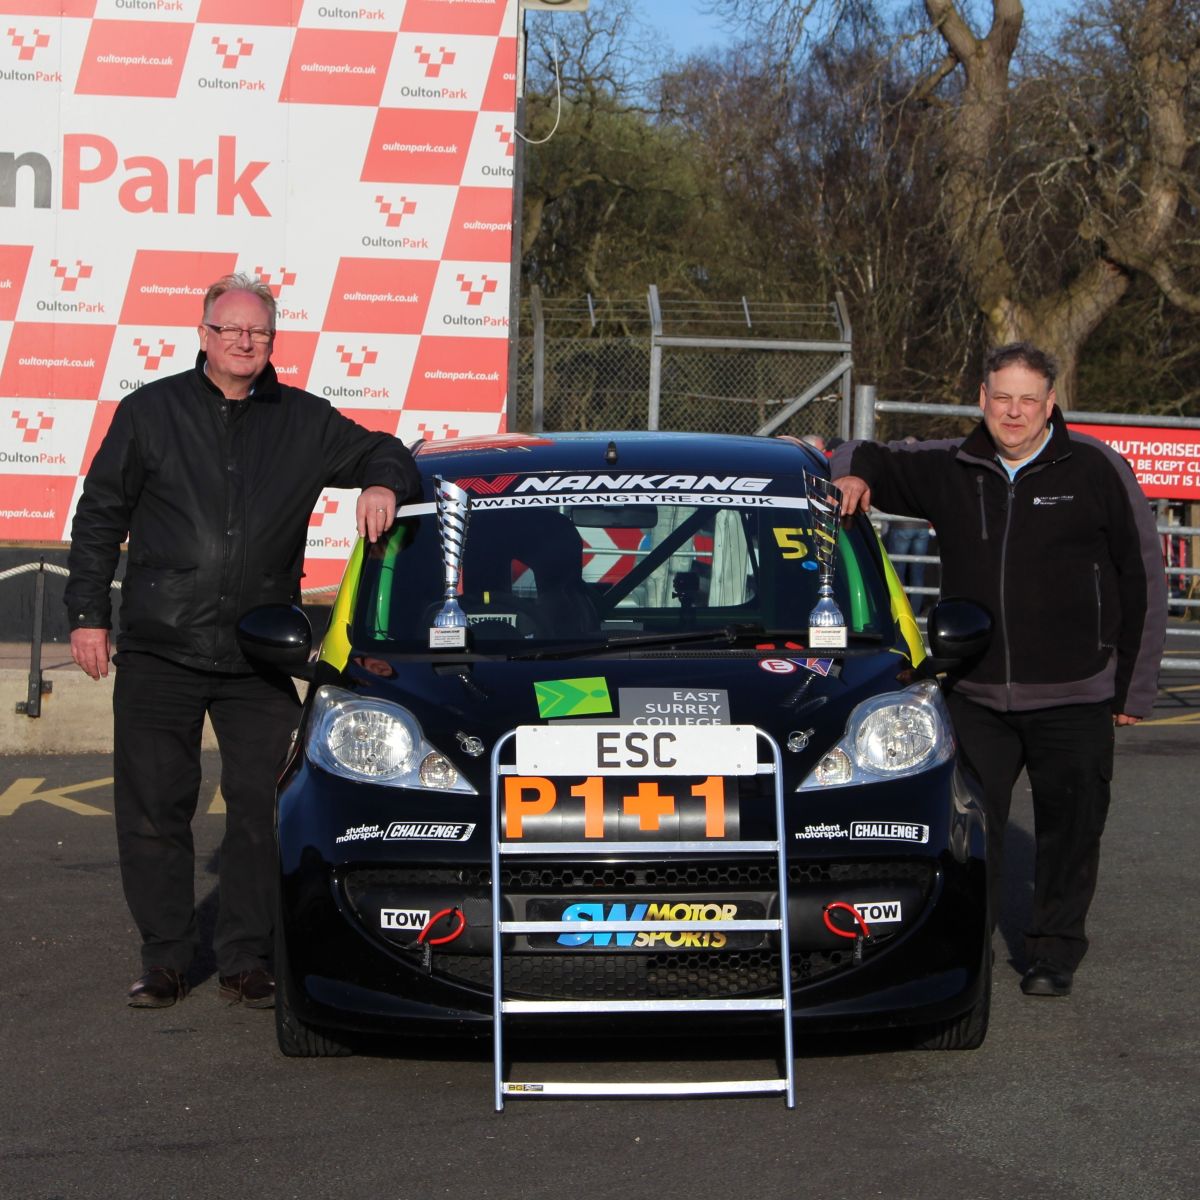 East Surrey College staff with the ESC Car